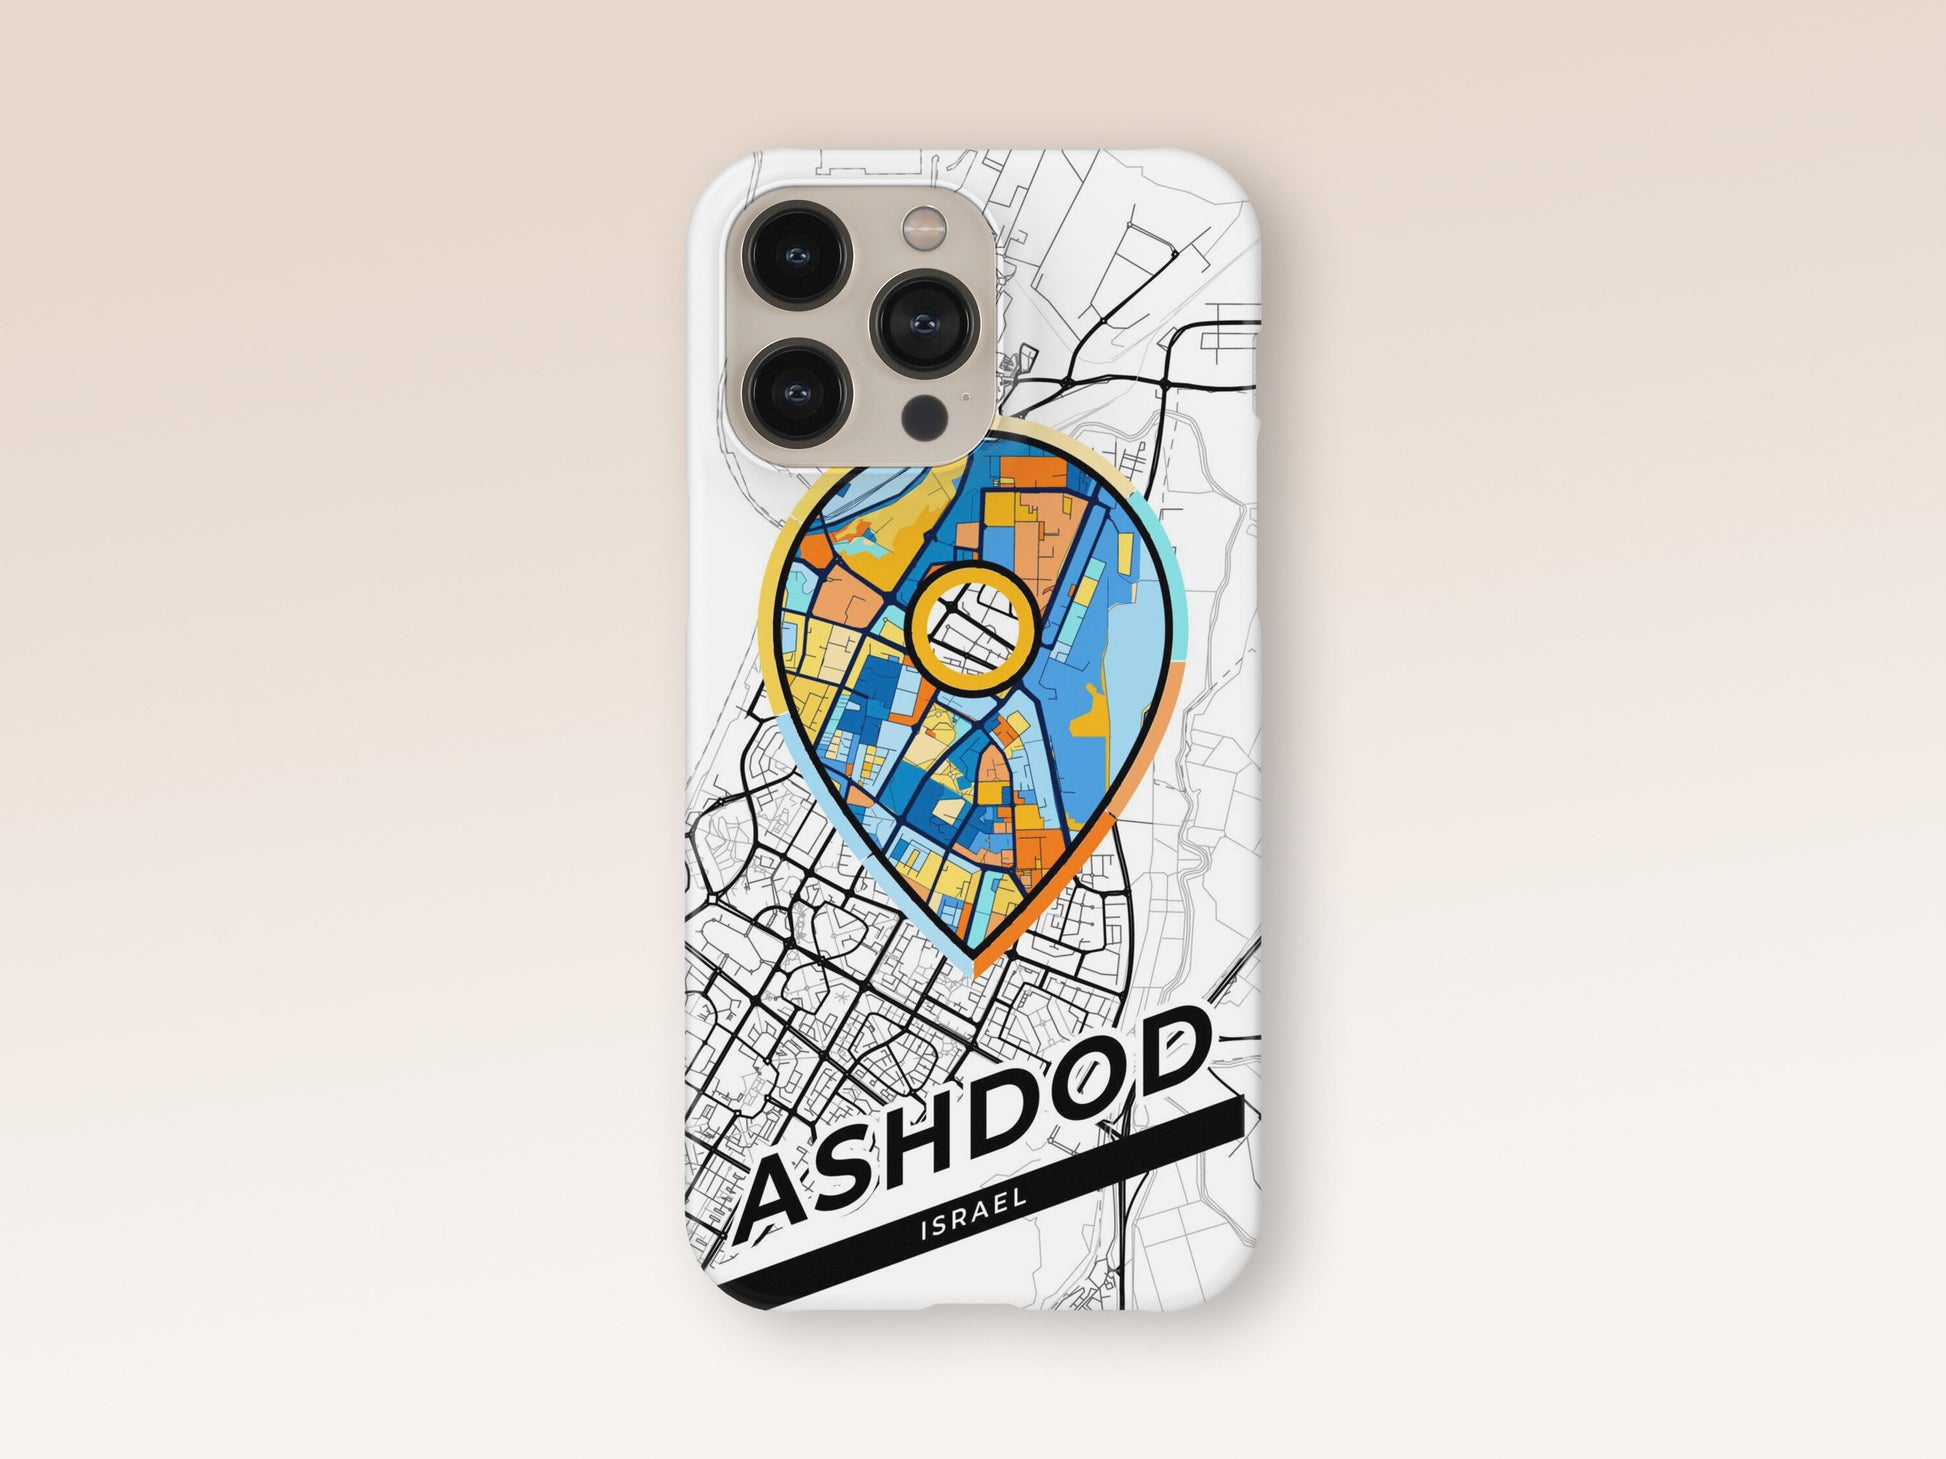 Ashdod Israel slim phone case with colorful icon. Birthday, wedding or housewarming gift. Couple match cases. 1